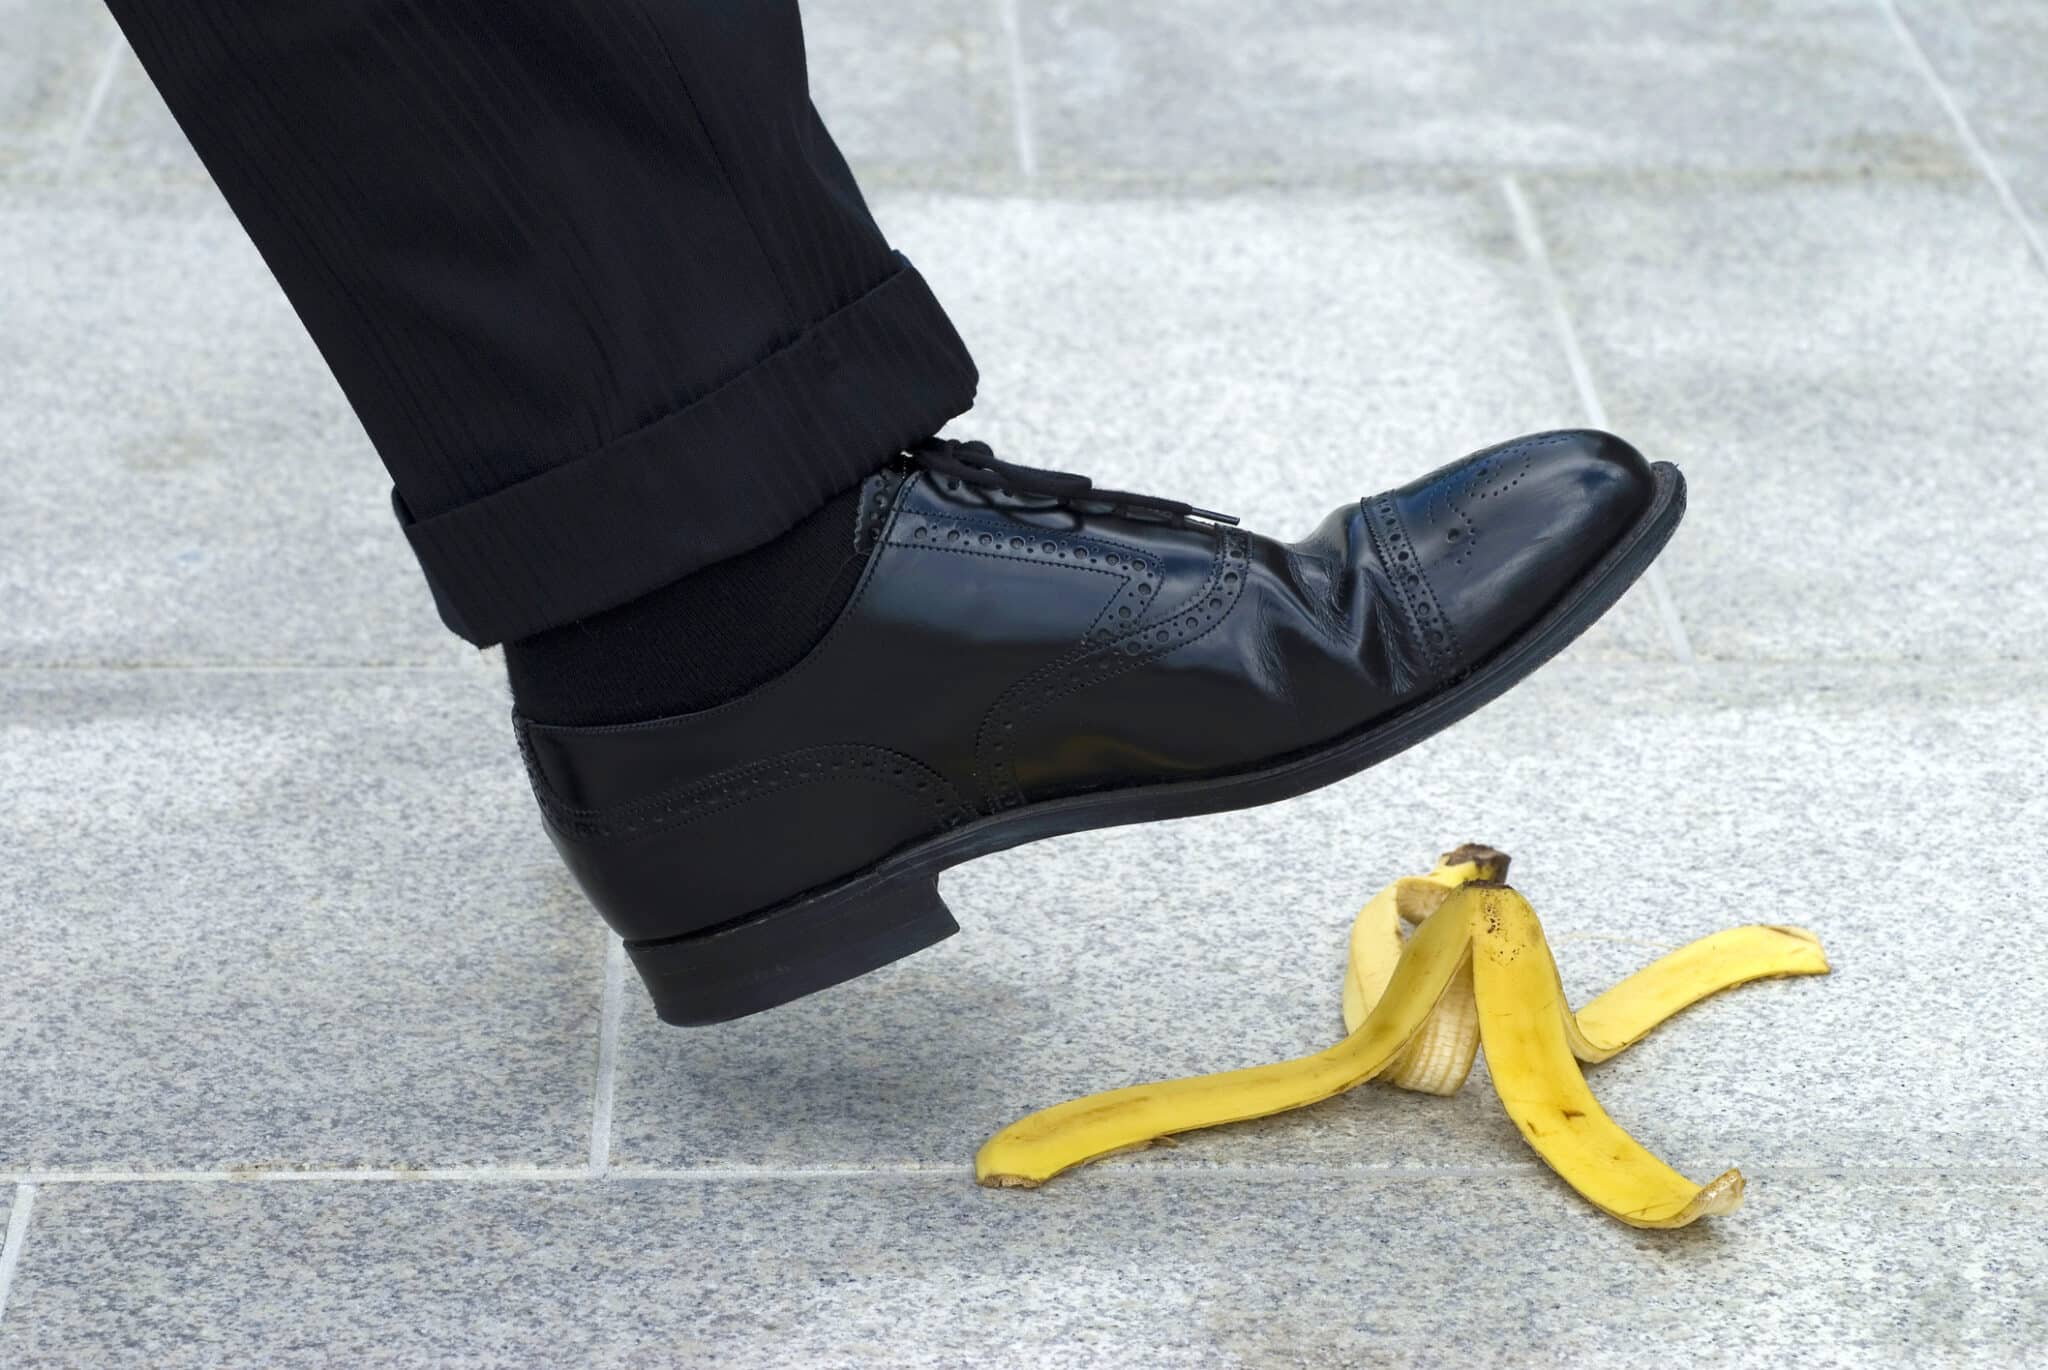 A man’s black brogue shoe poised to make the fateful mistake of stepping on a banana peel.